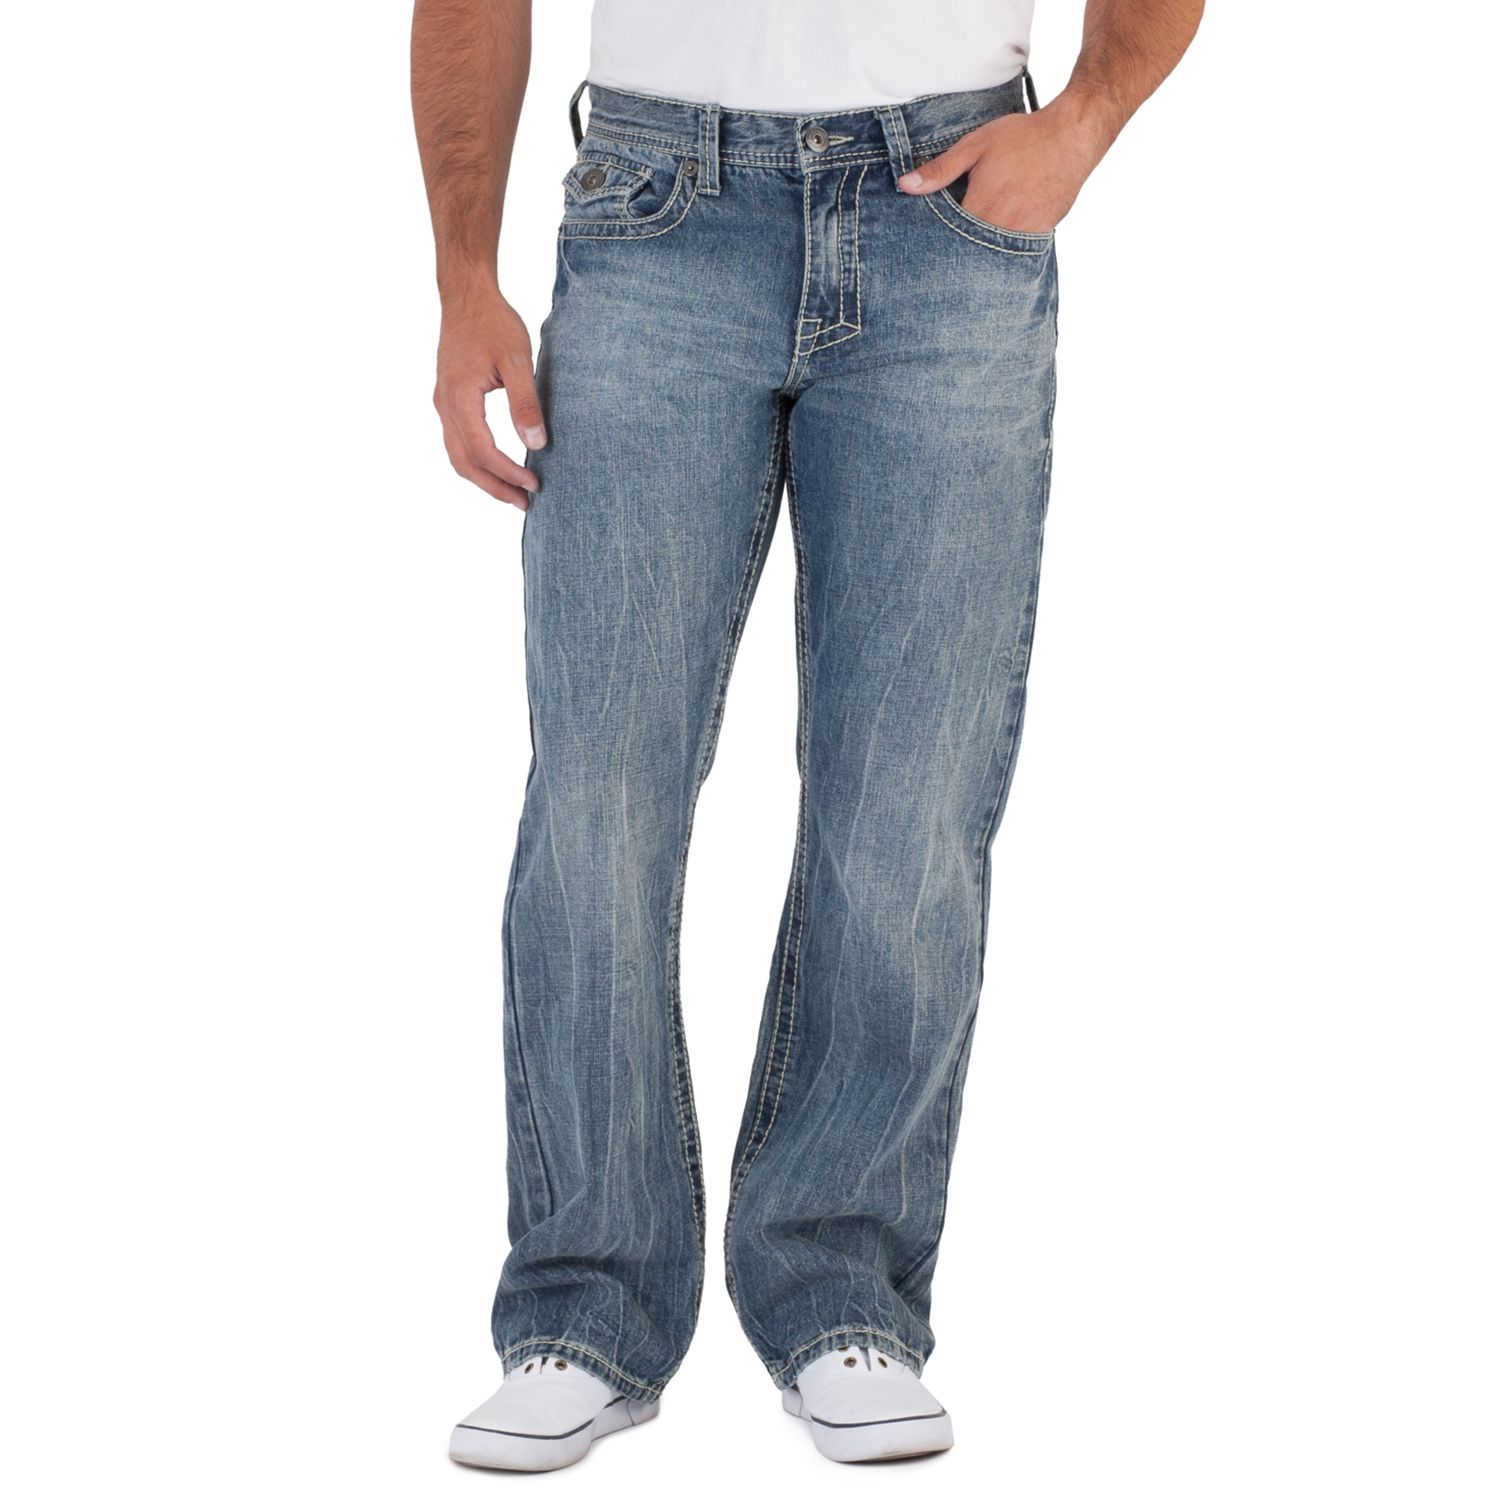 axe and crown jeans big and tall